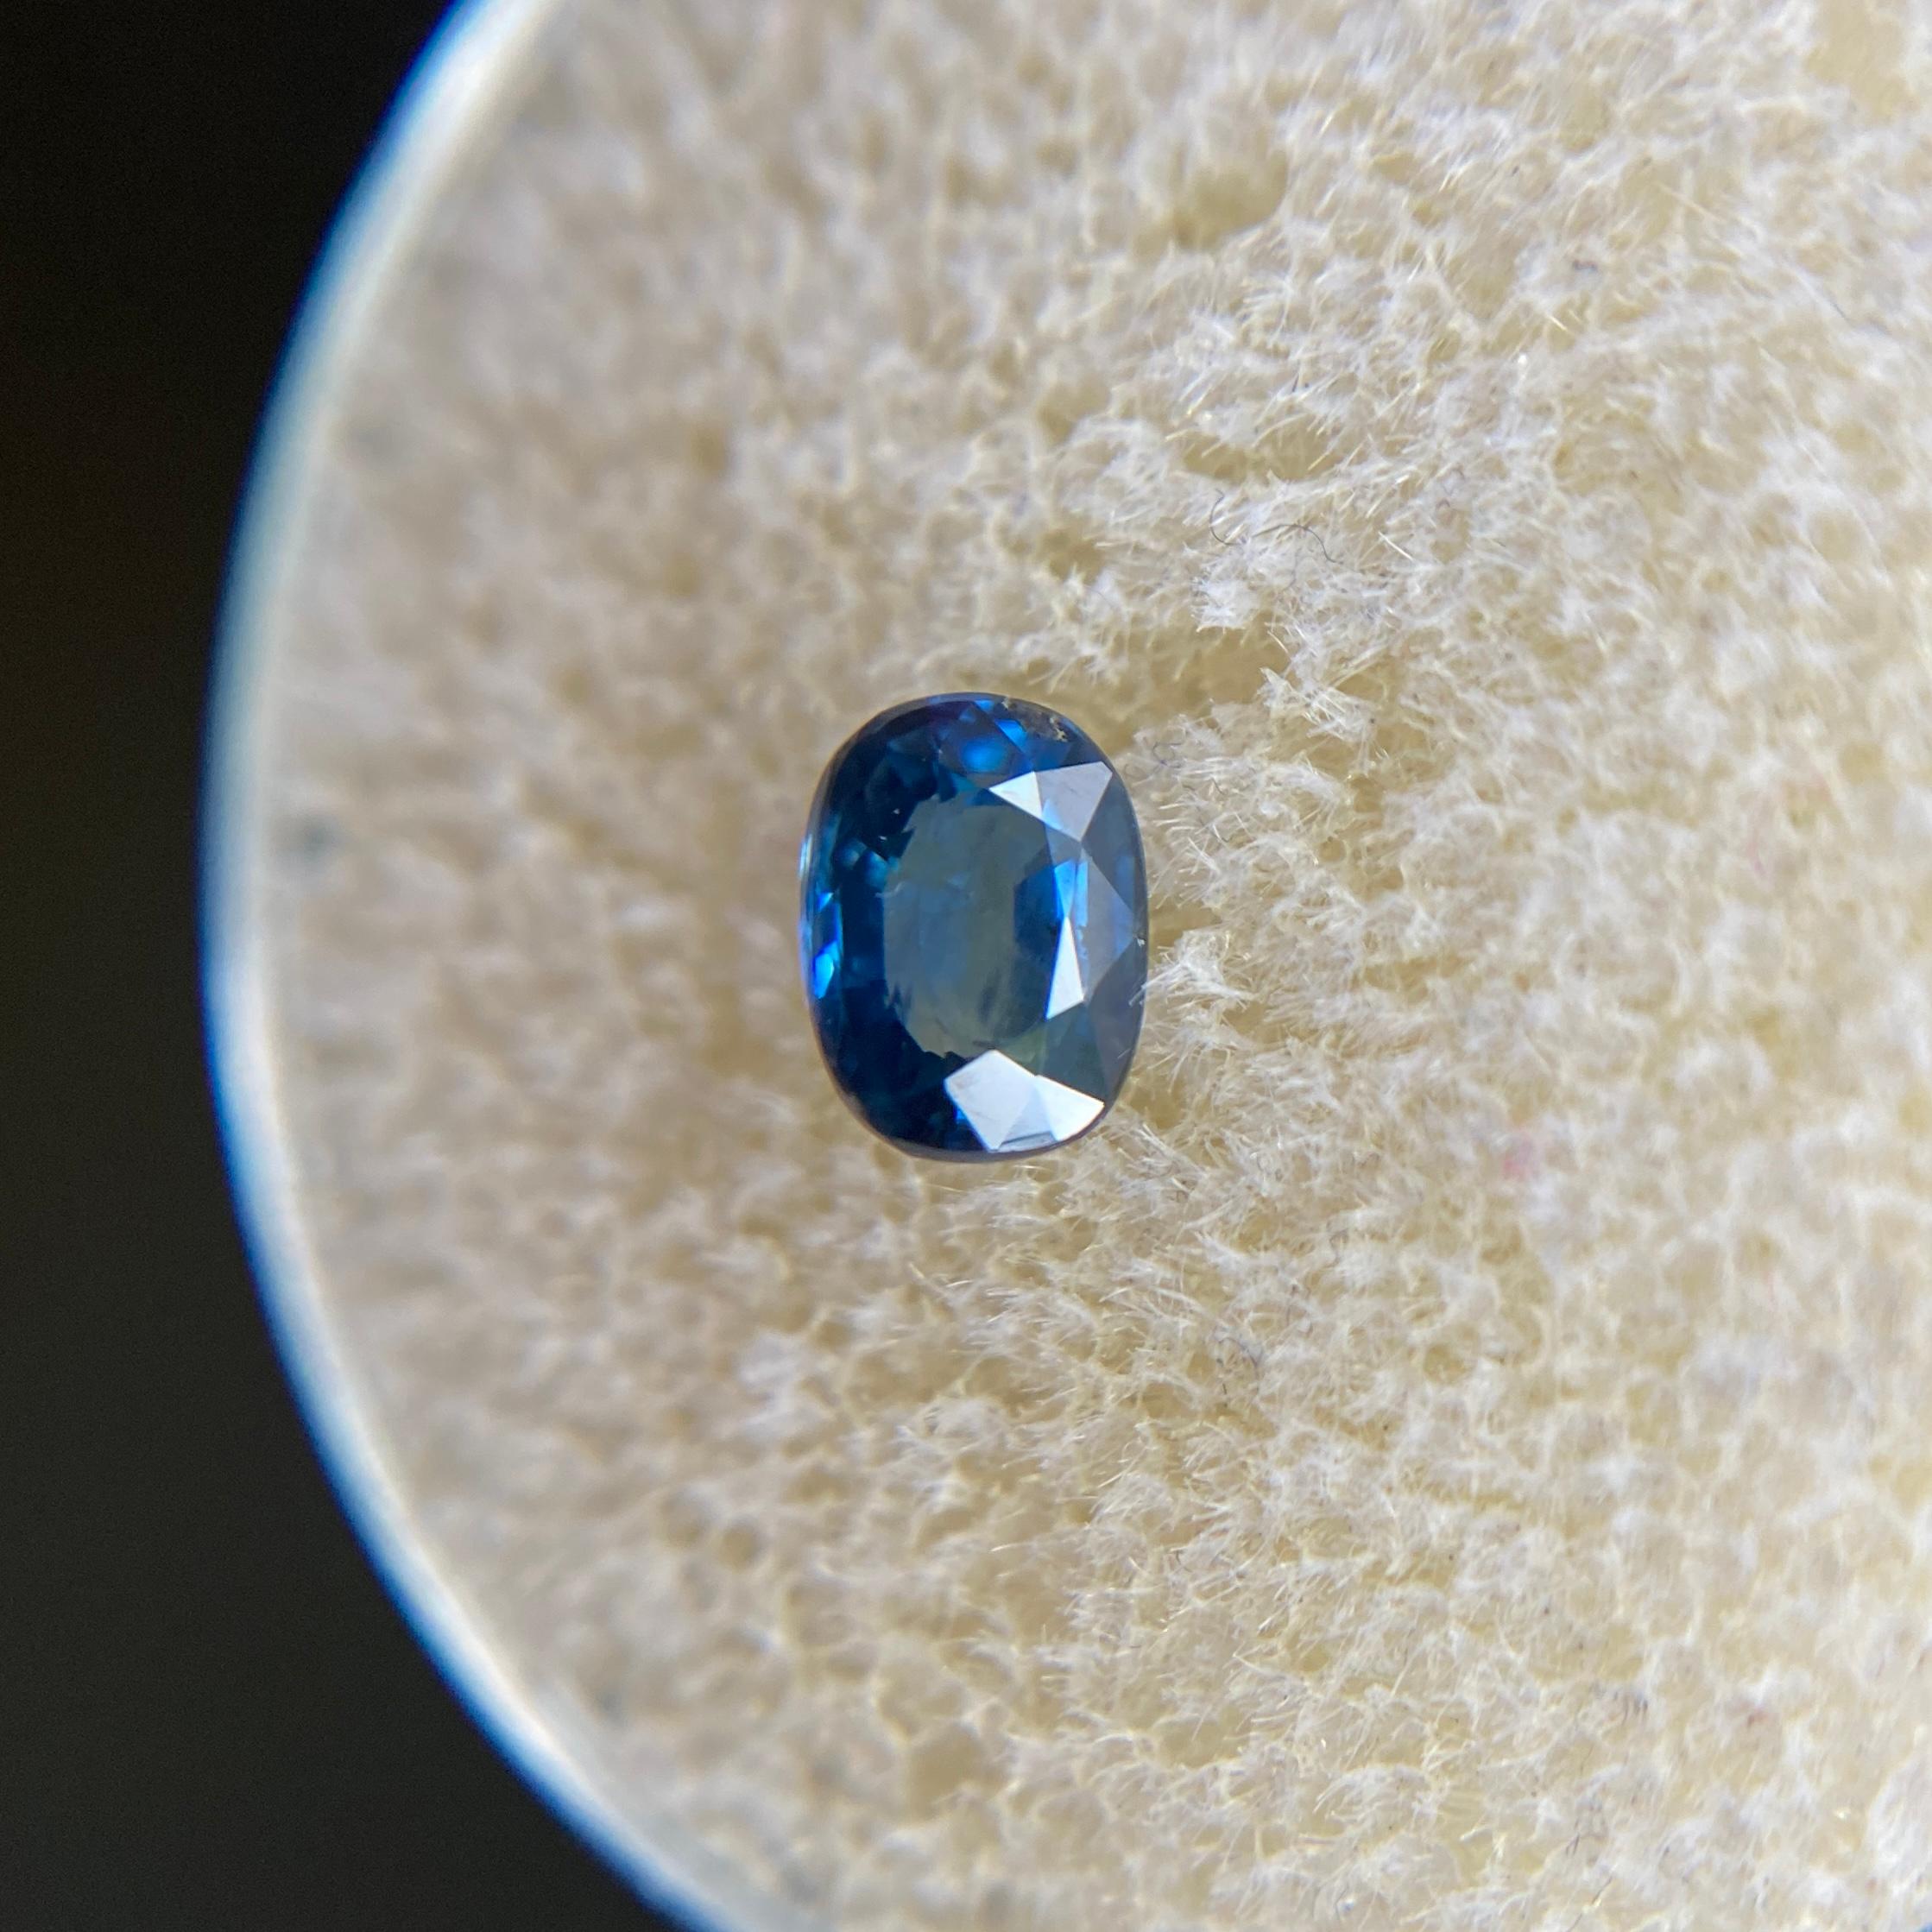 Natural Blue Australian Sapphire Gemstone.

0.56 Carat with a beautiful blue colour and good clarity, a clean stone with only some small natural inclusions visible when looking closely. Also has an excellent cushion cut and polish to show great